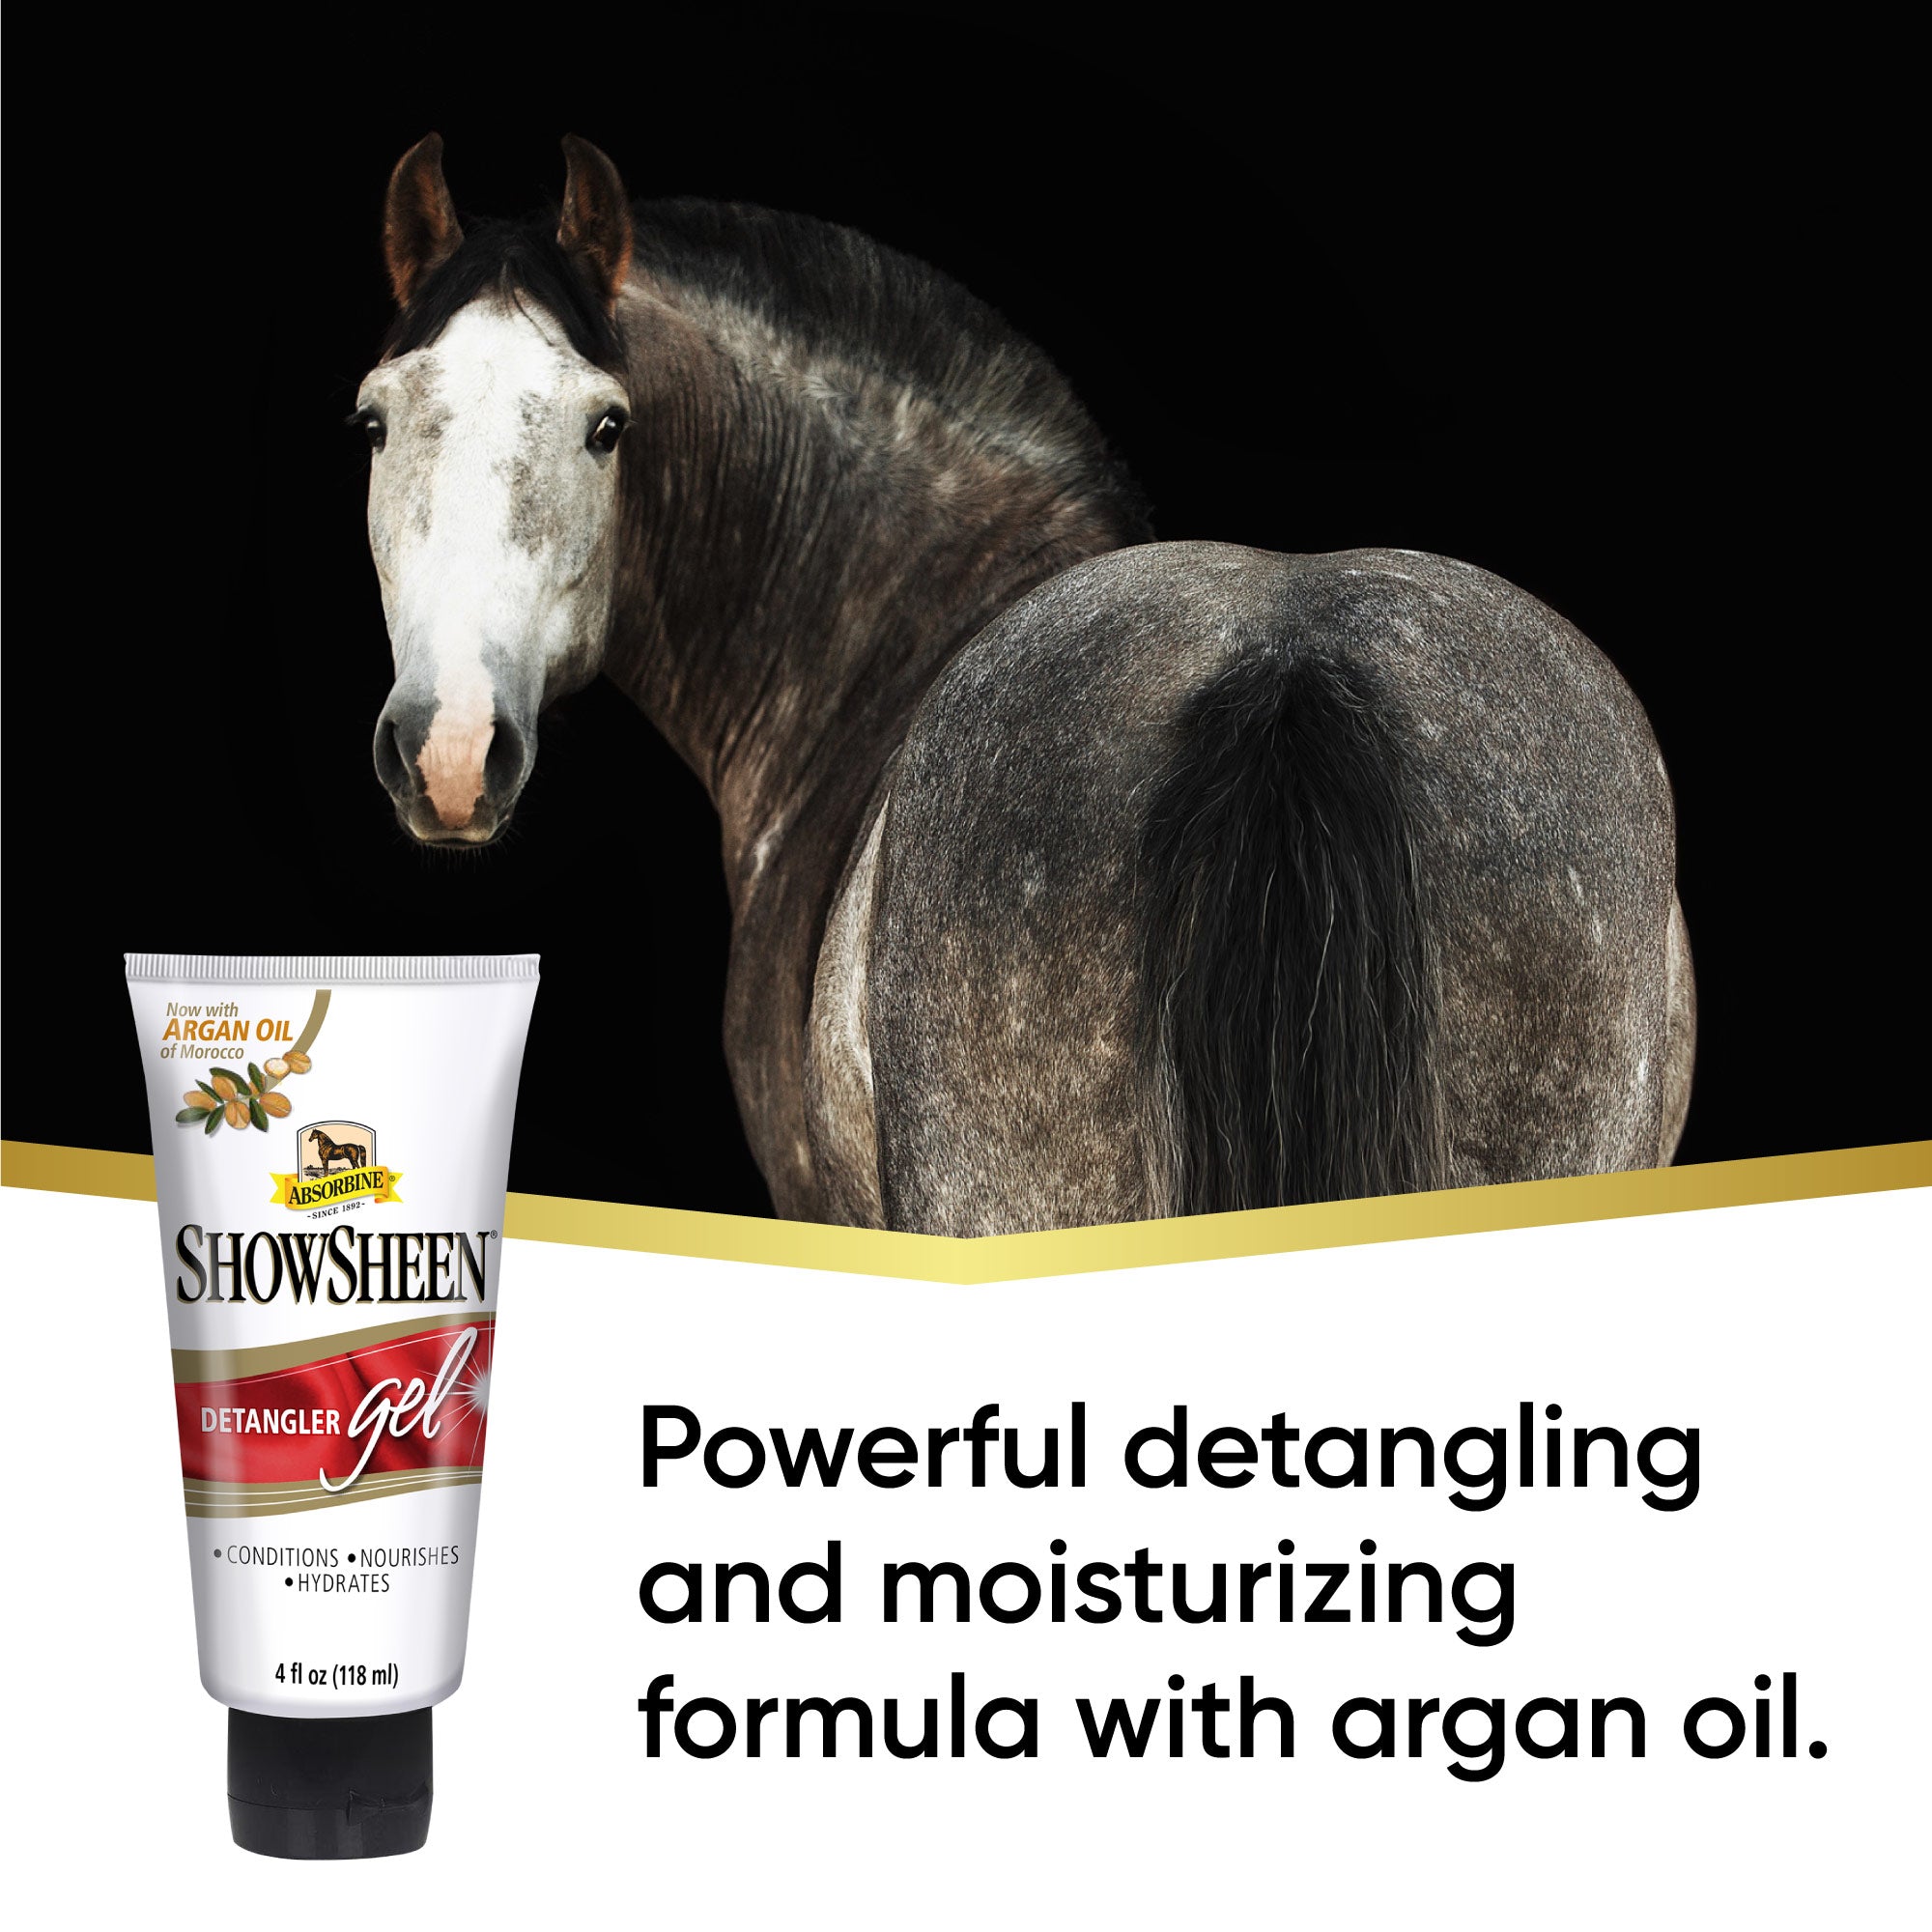 Gray horse with his tail showing, turning her face back towards the camera. Showsheen Detangler Gel, powerful detangling and moisturizing formula with argan oil.